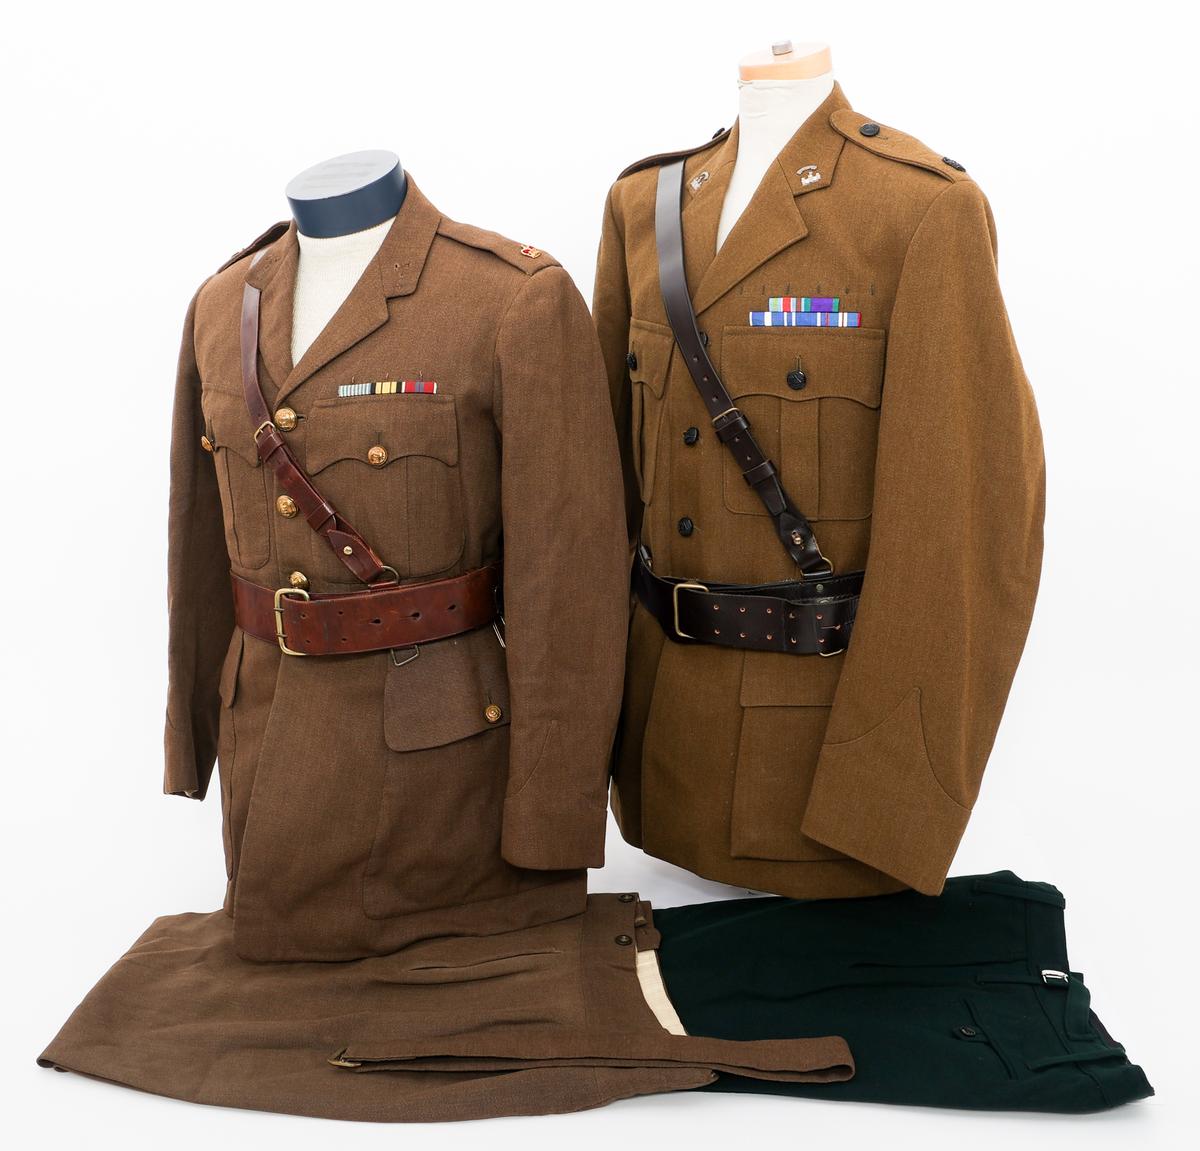 COLD WAR - CURRENT BRITISH ARMY OFFICER UNIFORMS